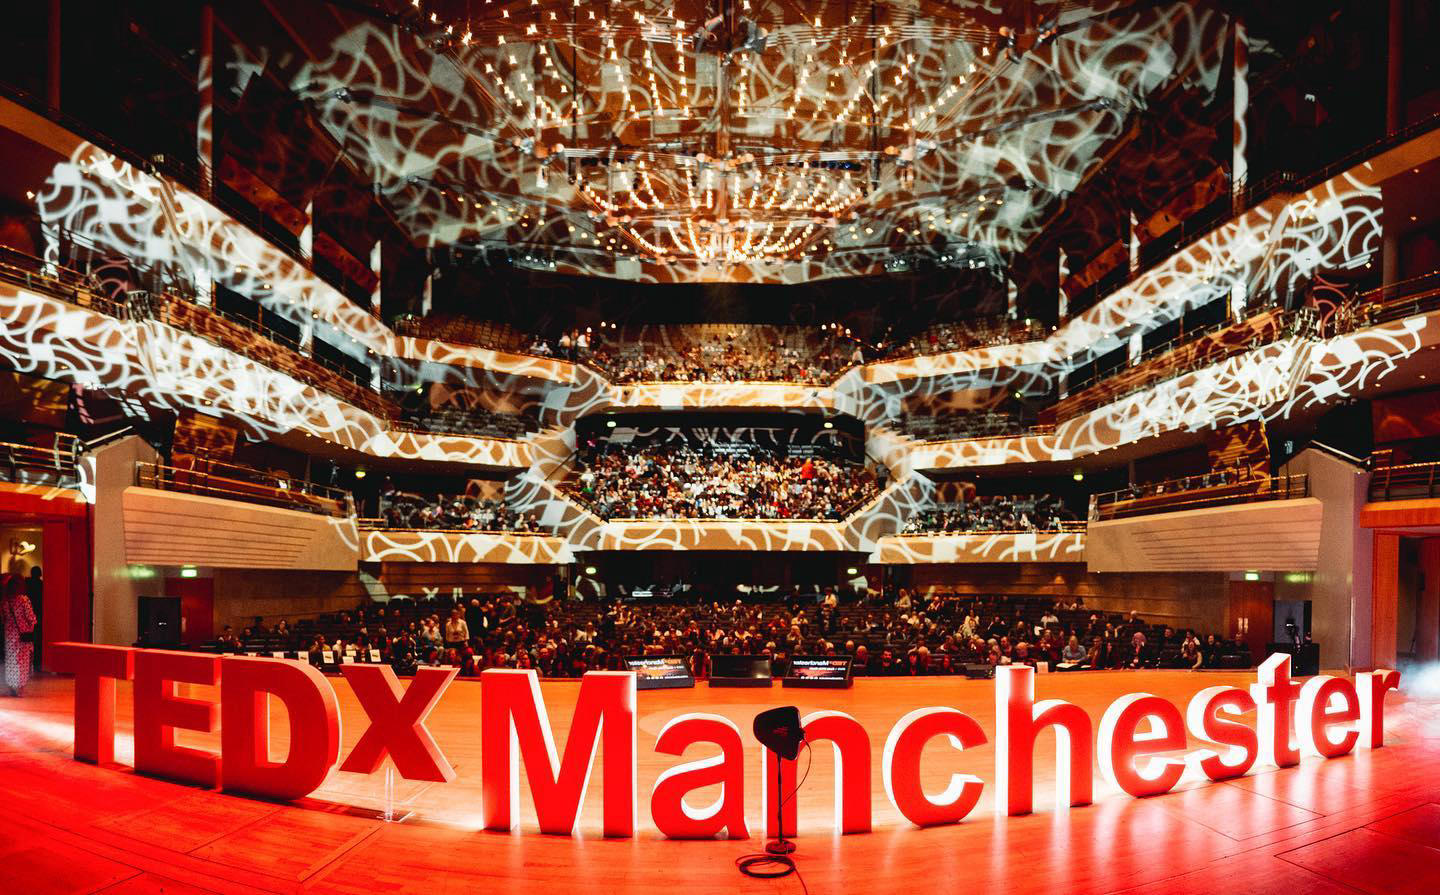 Kaleidoscopic lighting casts a surreal web over the TEDxManchester theater in Manchester, United Kin